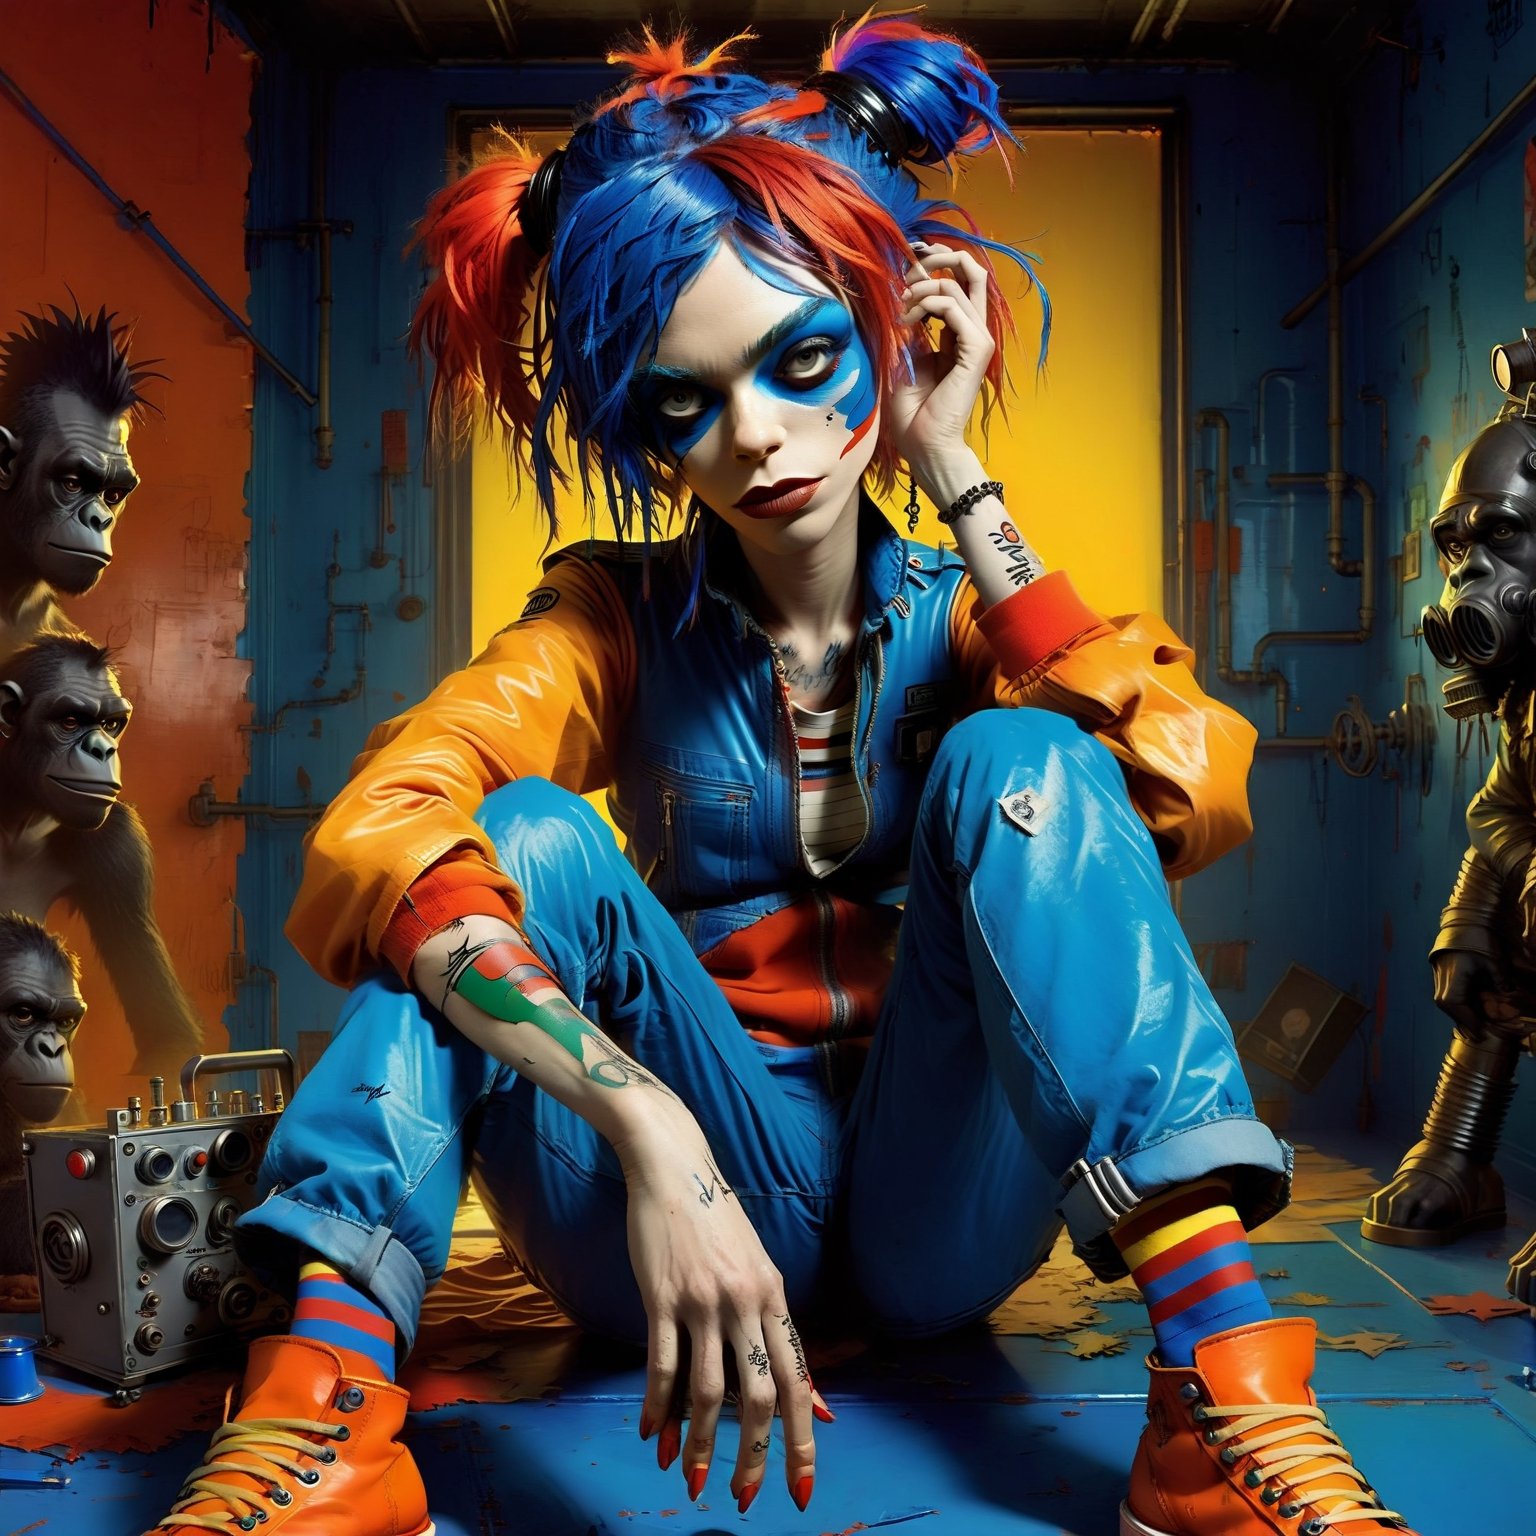 A woman sits regally in a steel throne, her messy orange buns hairstyle framing her bold features. Monochrome, Face paint, Blue eyes gleam through a gas mask, its metallic sheen reflecting the vibrant hues of her attire. Orange and red sneakers pop against the throne's industrial backdrop. Bandages wrap her limbs like a second skin, some torn and frayed, others neatly wrapped. Her gaze pierces the camera, as if challenging the viewer to approach. (In the style of Gorillaz' 2D artwork, Jamie Hewlett's signature flair is evident in the bold lines, vivid colors, and playful nods to industrial chic:1.4).